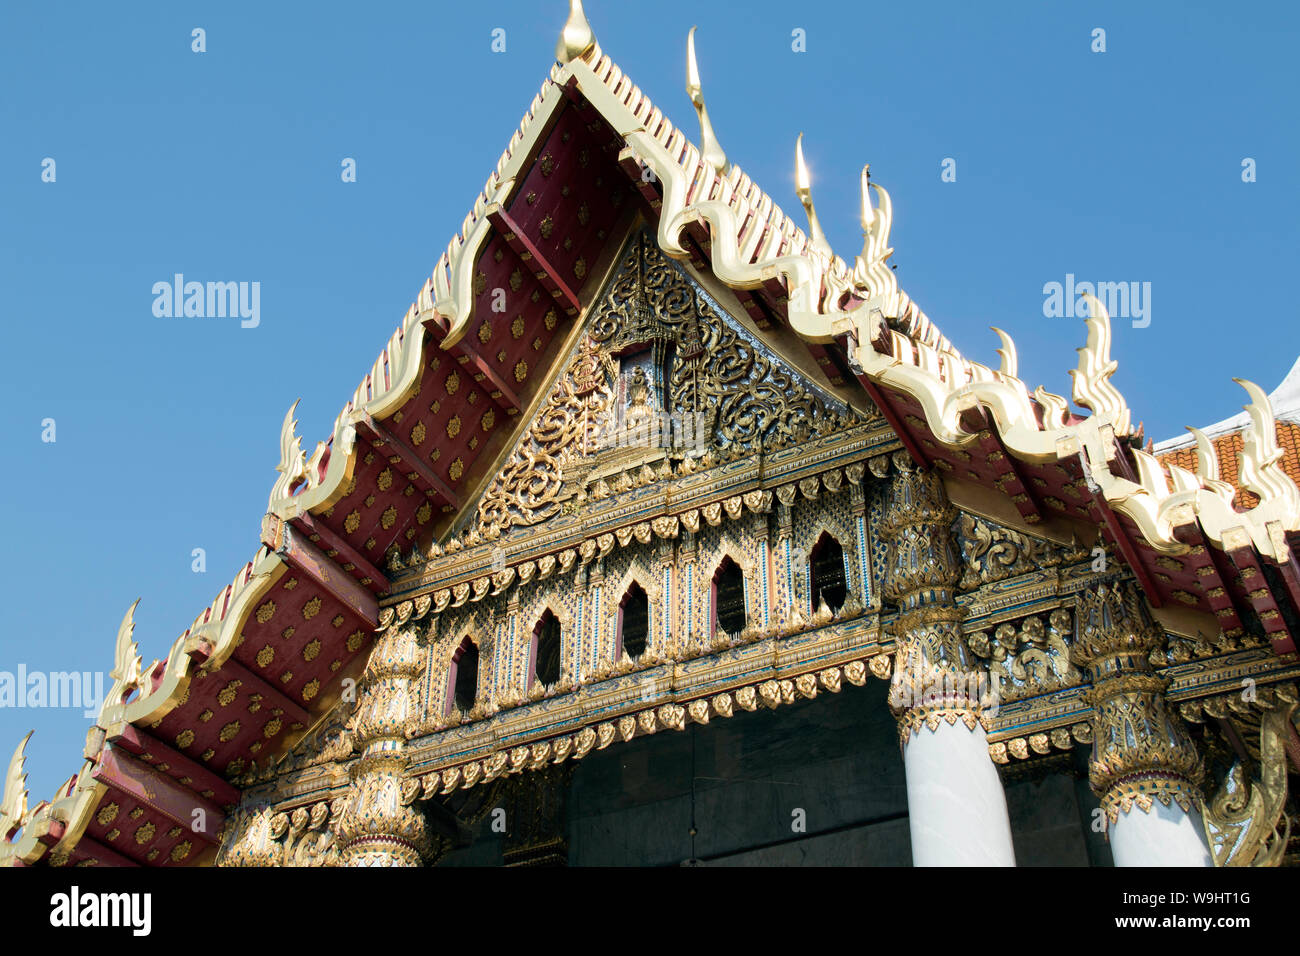 Detail of the Ordination Hall roof of the Marble Temple in Bangkok Stock Photo